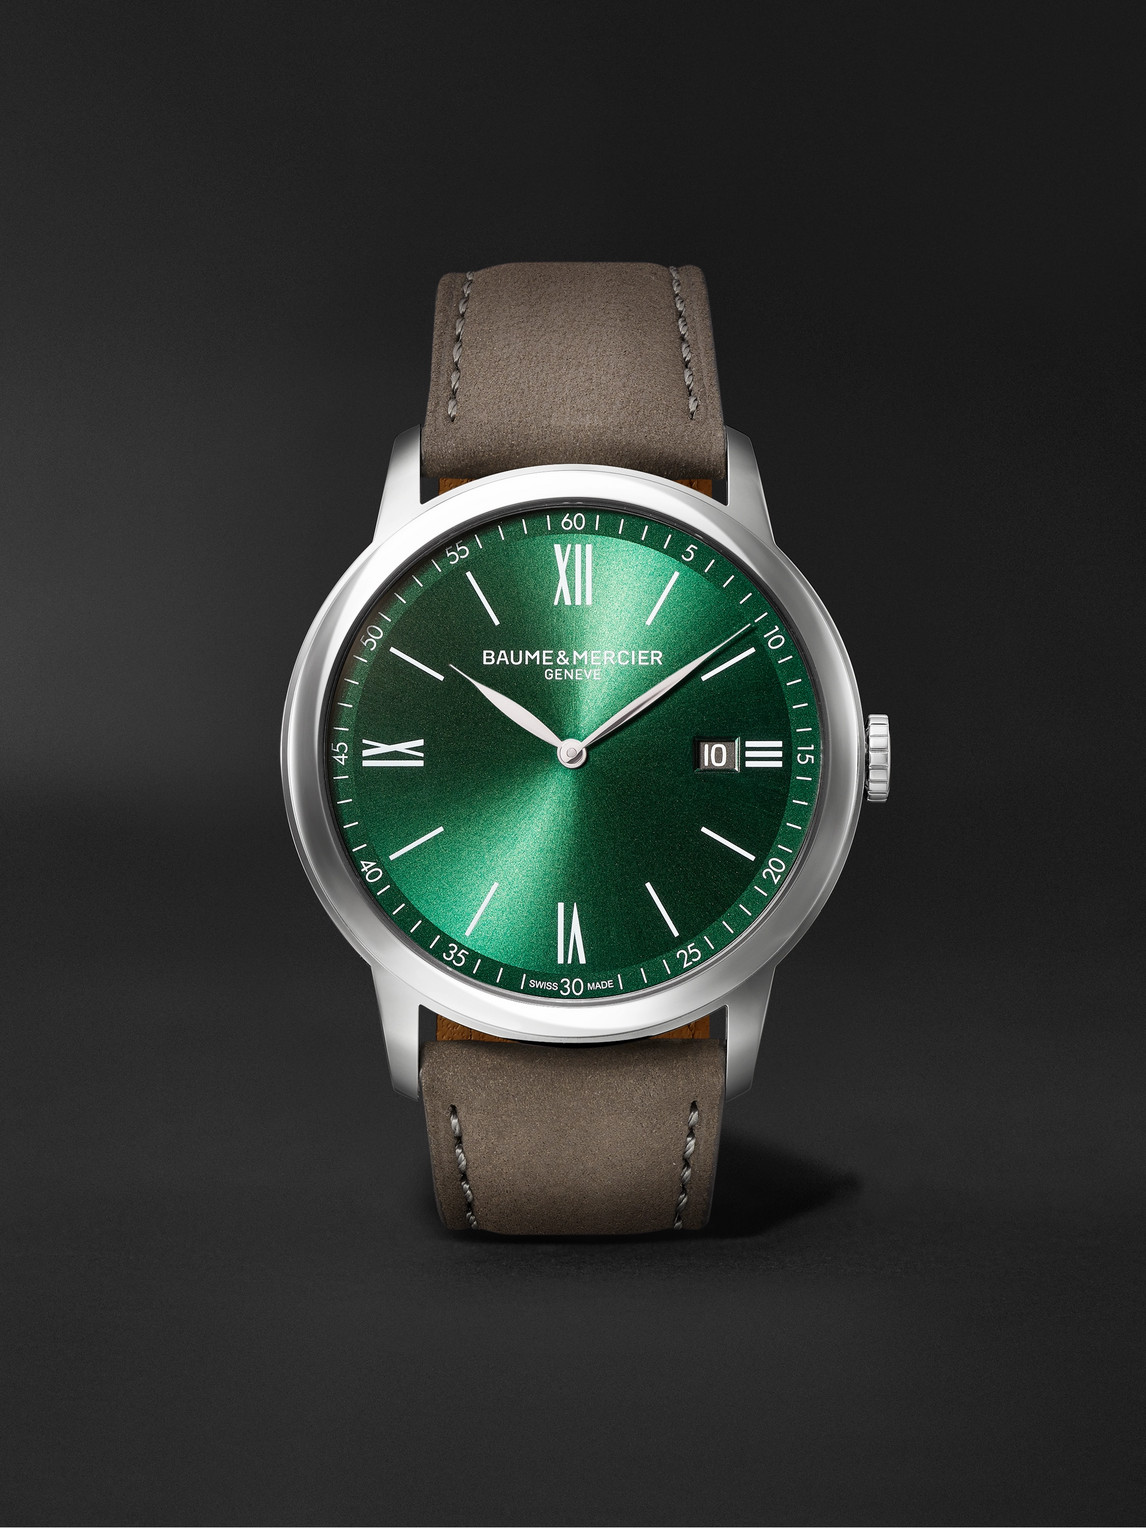 Baume & Mercier Classima 42mm Stainless Steel And Nubuck Watch, Ref. No. M0a10607 In Green